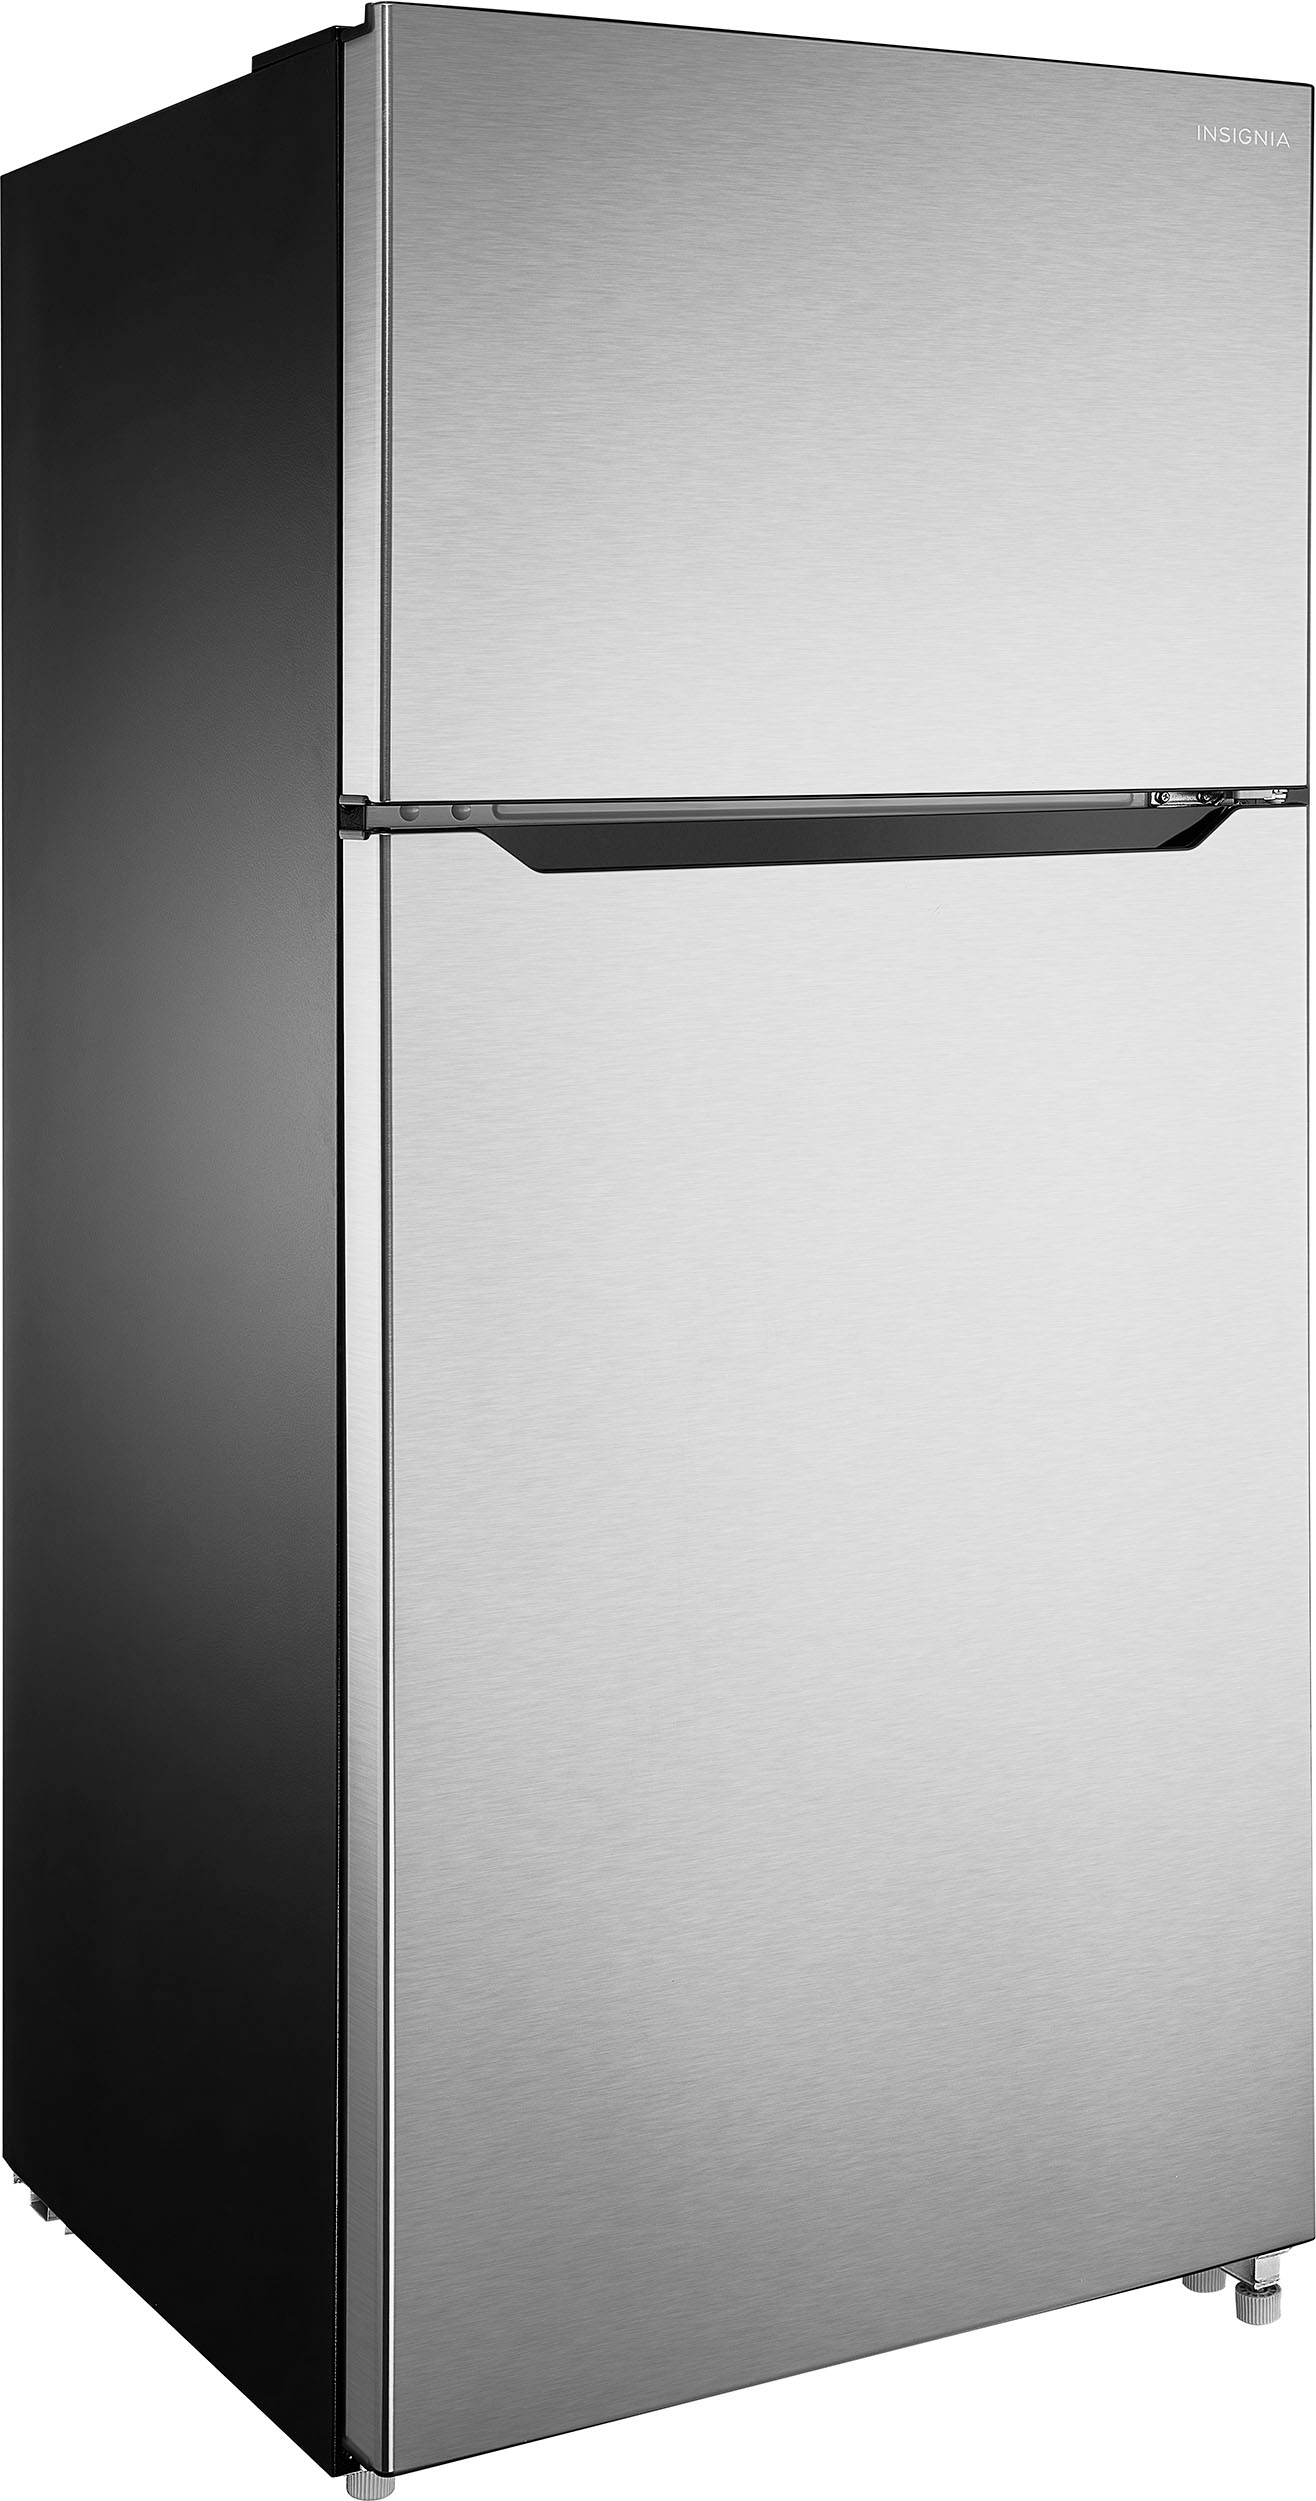 Angle View: Insignia™ - 18 Cu. Ft. Top-Freezer Refrigerator - Stainless steel